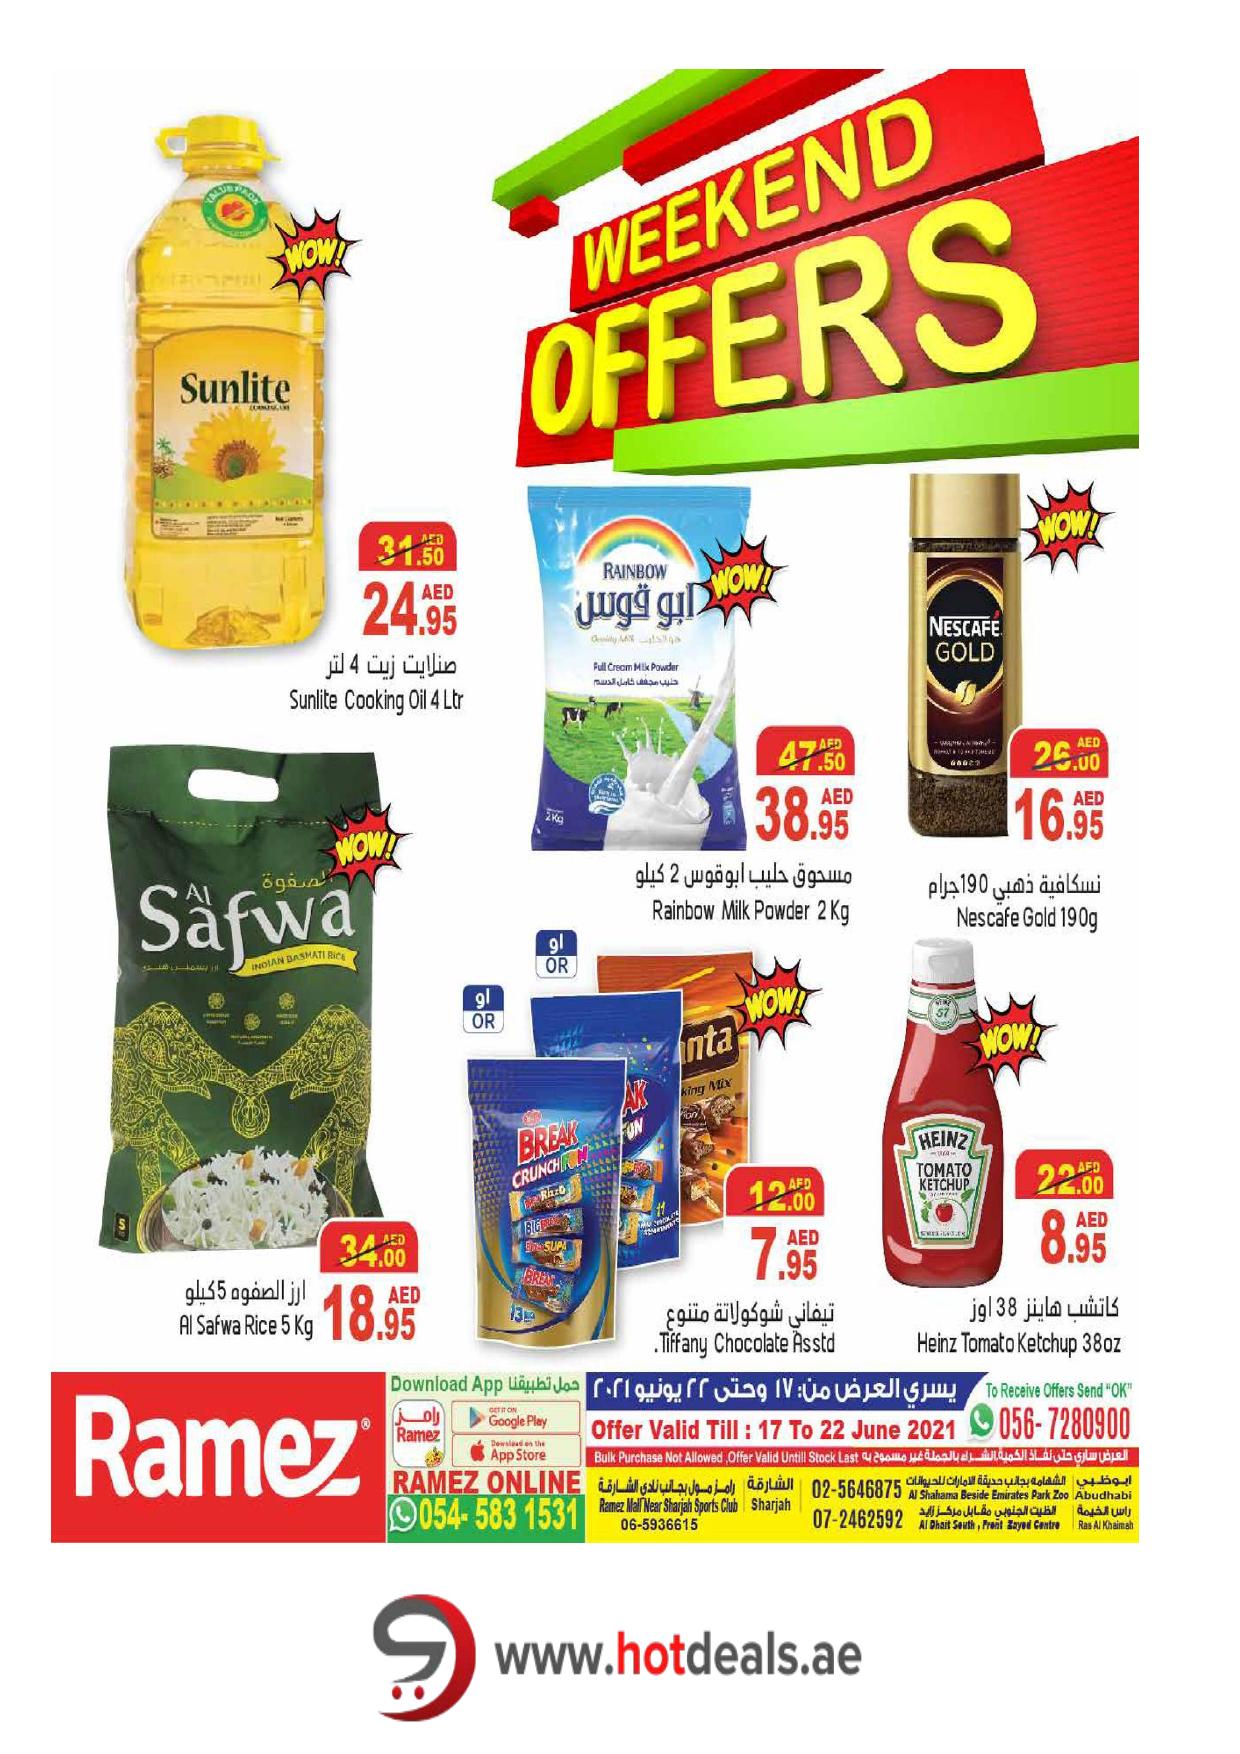 <p><span style="font-size: 18px;"><font color="#424242">Weekend Offers</font></span><br></p>